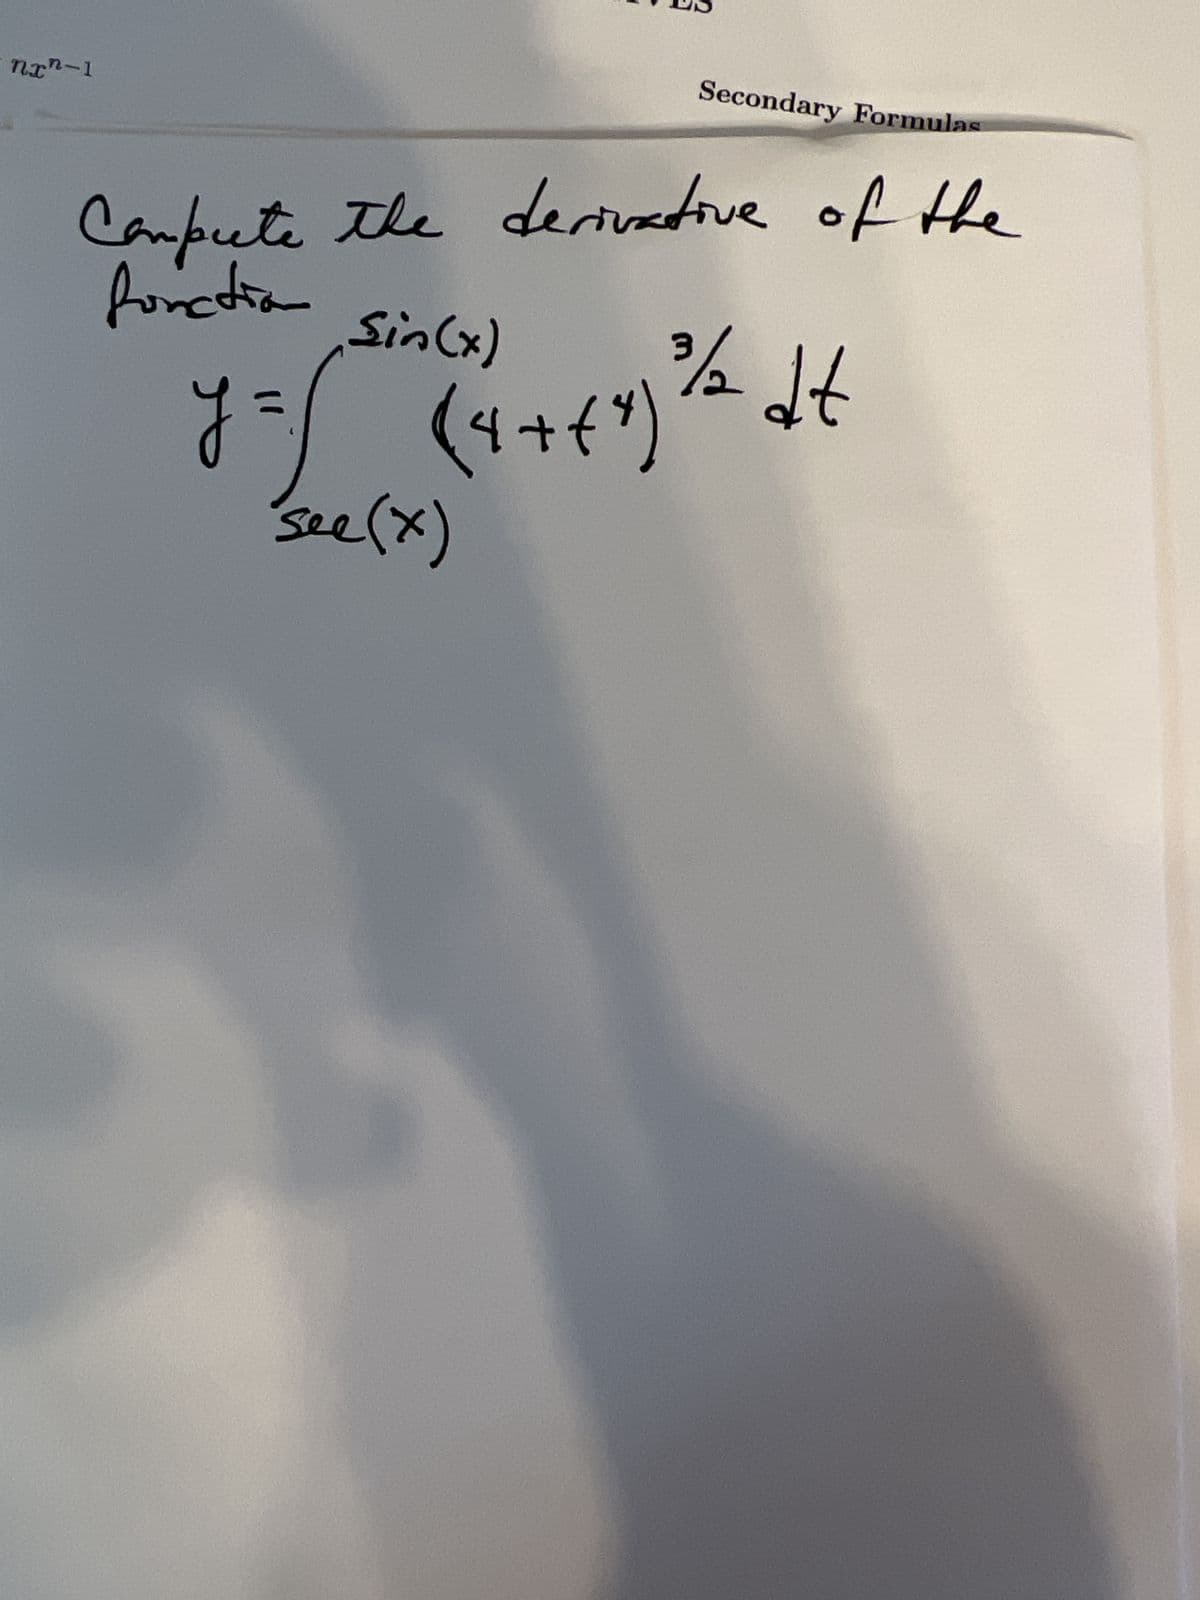 nan-1
Secondary Formulas
Compute the derivative of the
fonction
Sin(x)
¾/2 dt
y=/ (4++*)
see (x)